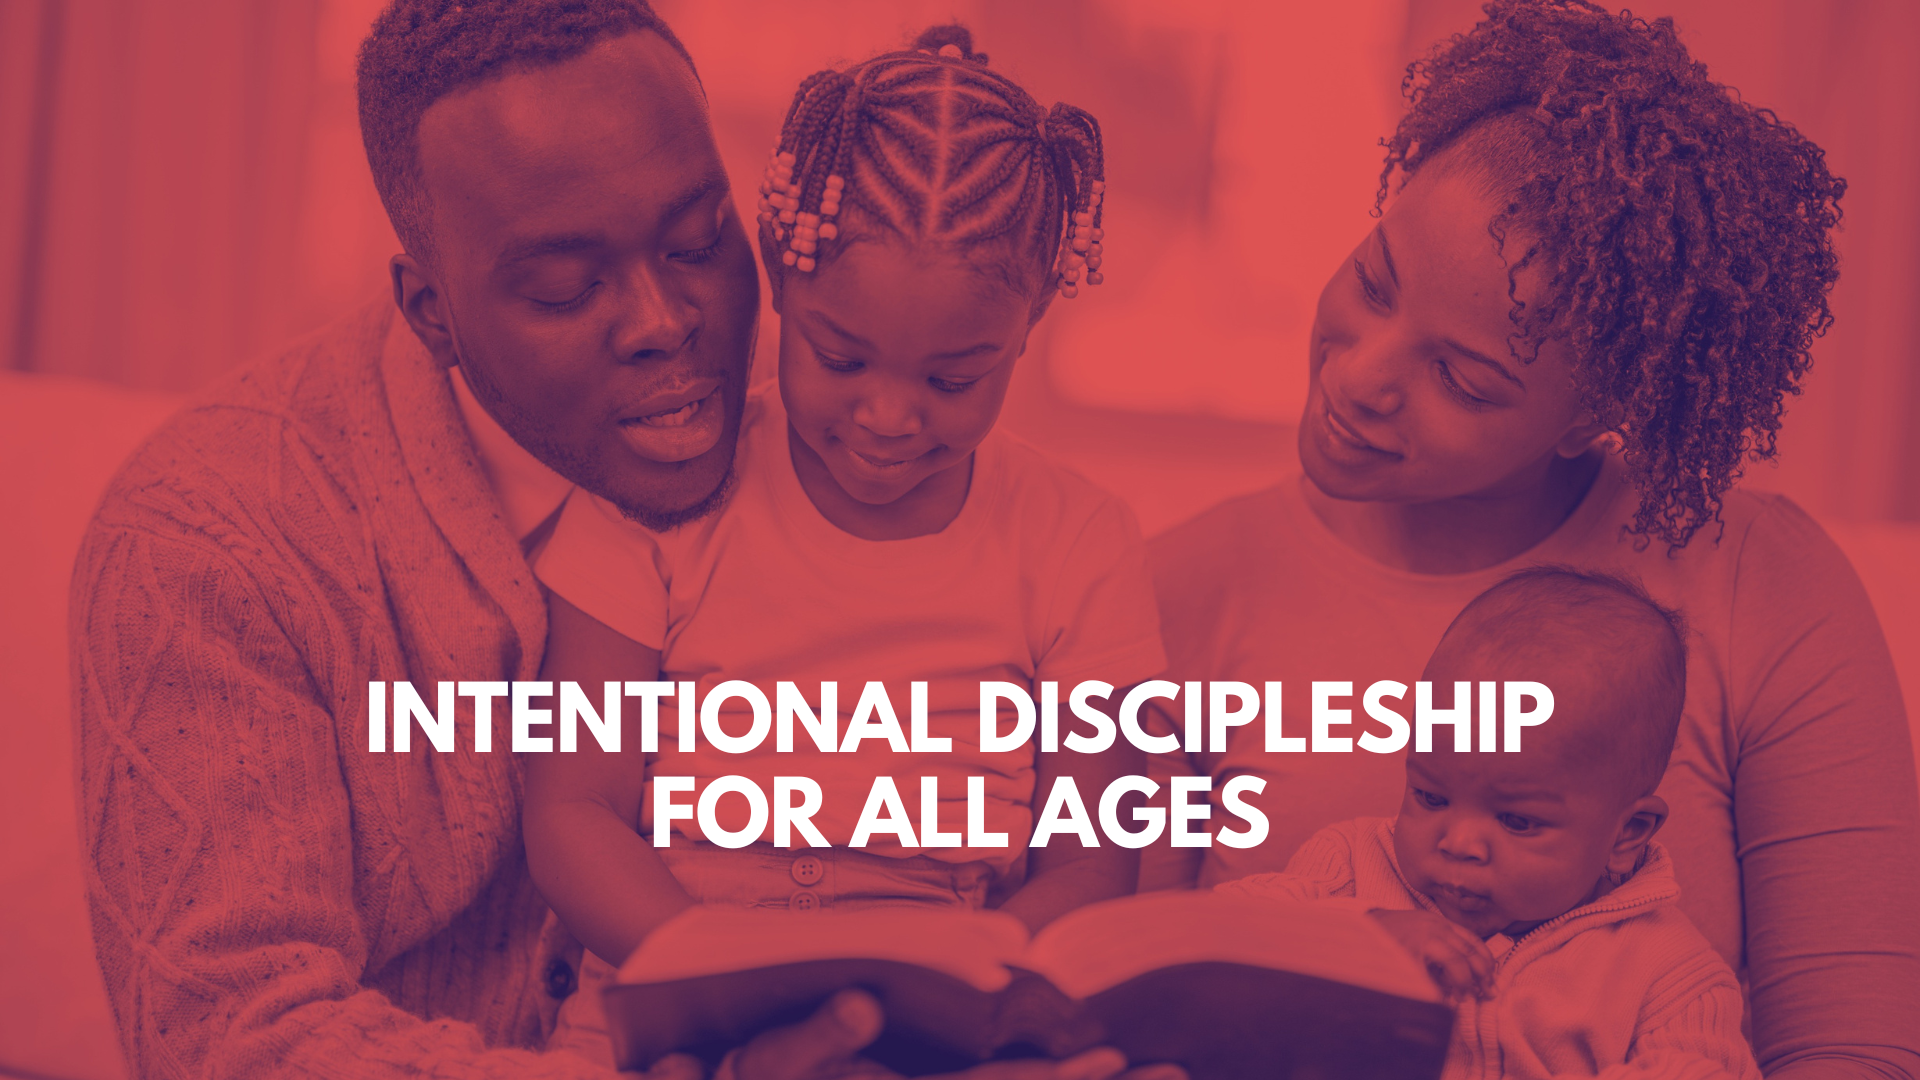 Intentional Discipleship for All Ages